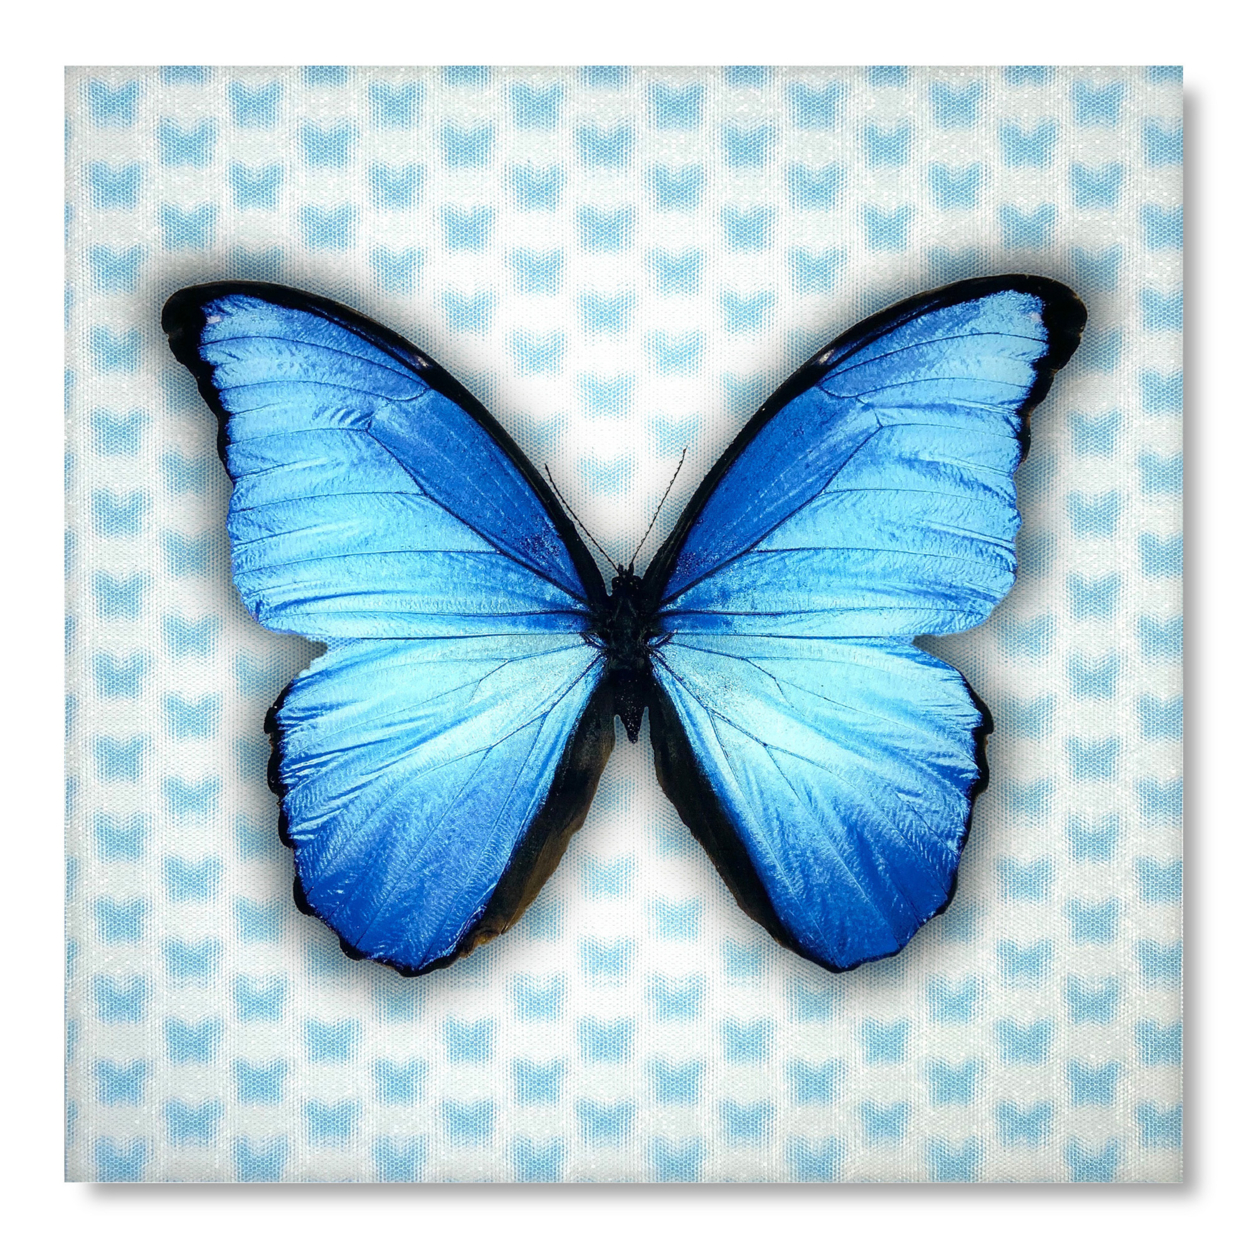 5D Multi-Dimensional Butterfly Wall Art Print On Strong Polycarbonate Panel - Immersive, Lenticular Artwork By Matashi (16x16 Inch)